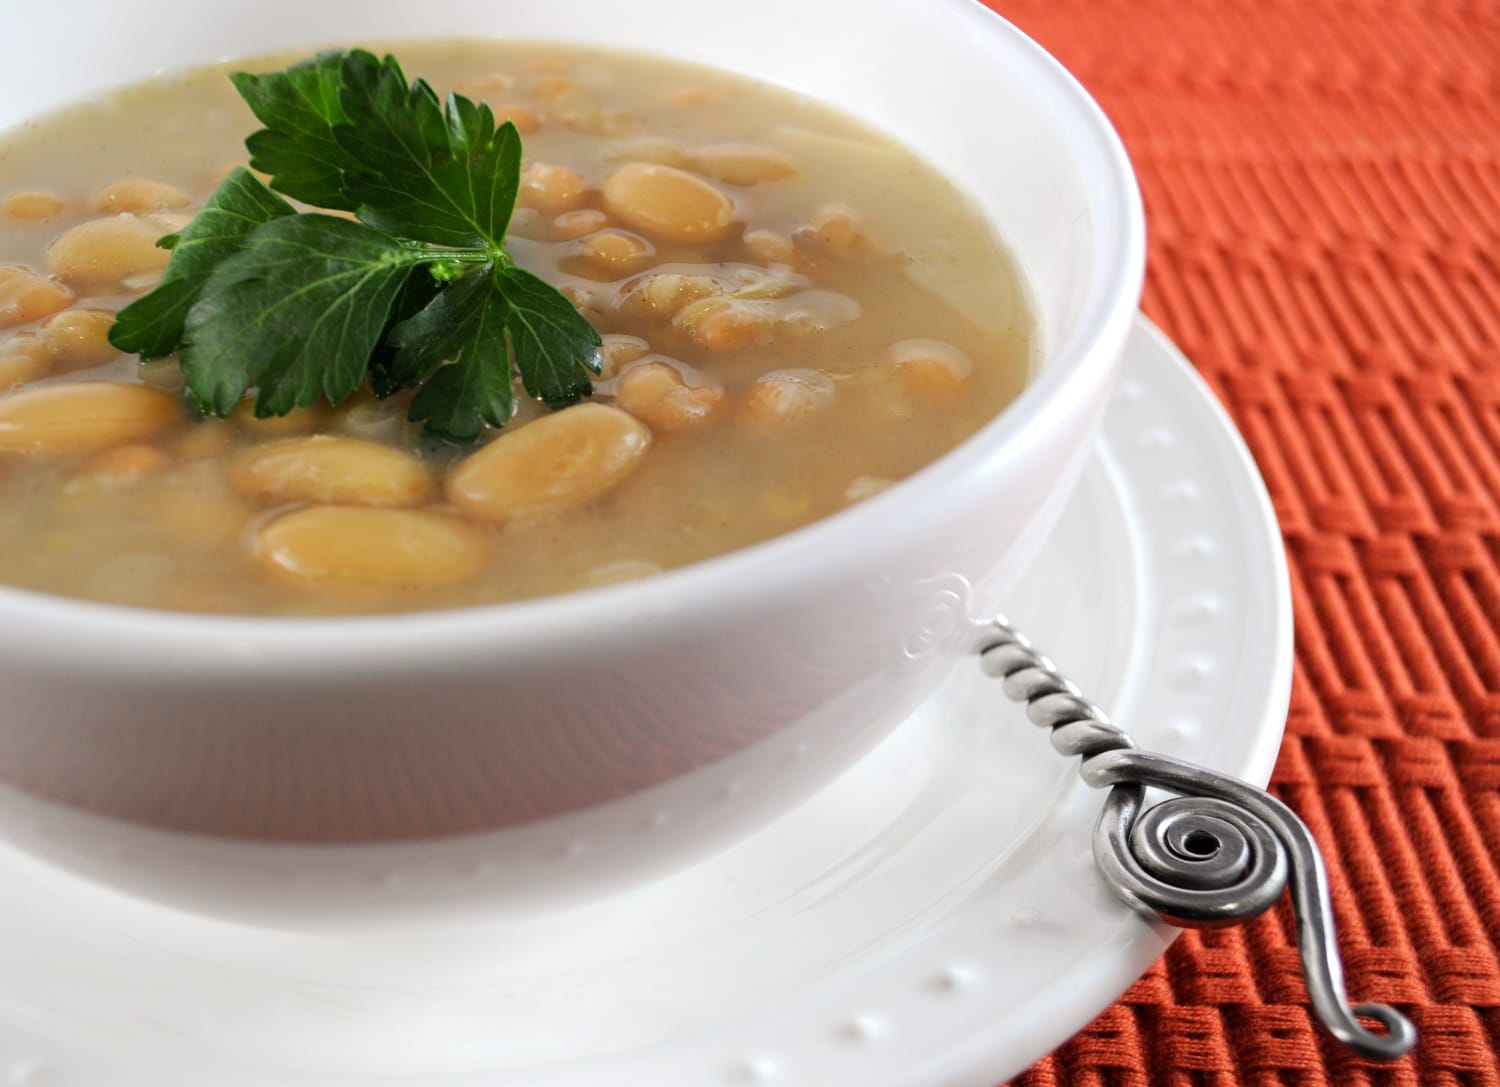 Tuscan White Bean and Roasted Garlic Soup